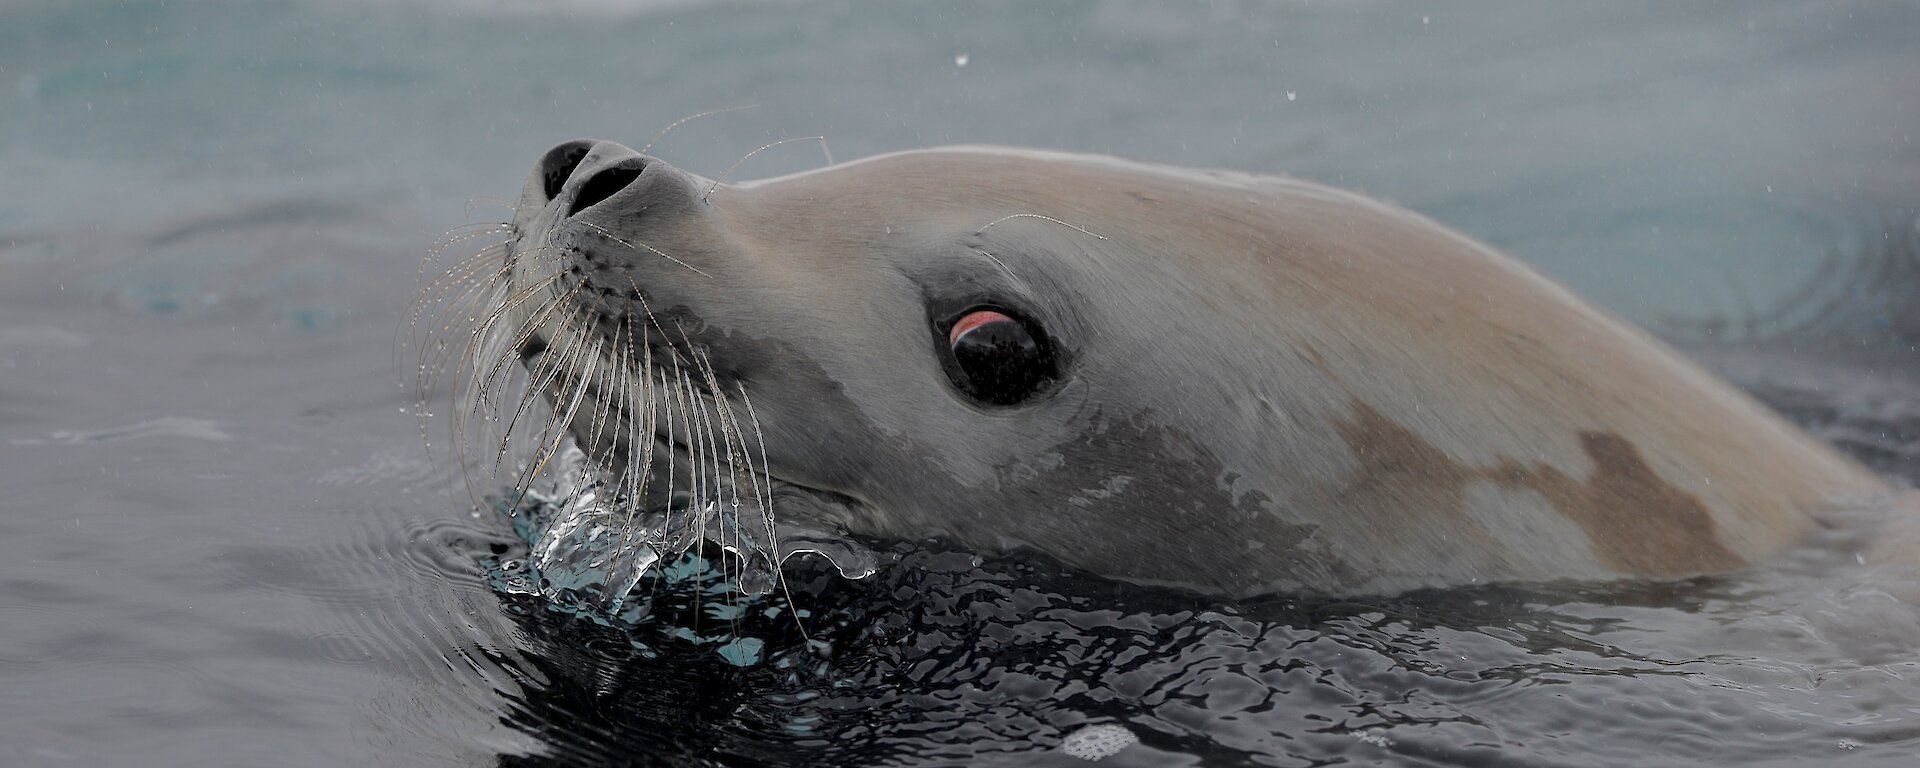 The head of a Weddell seal poking out of the water.